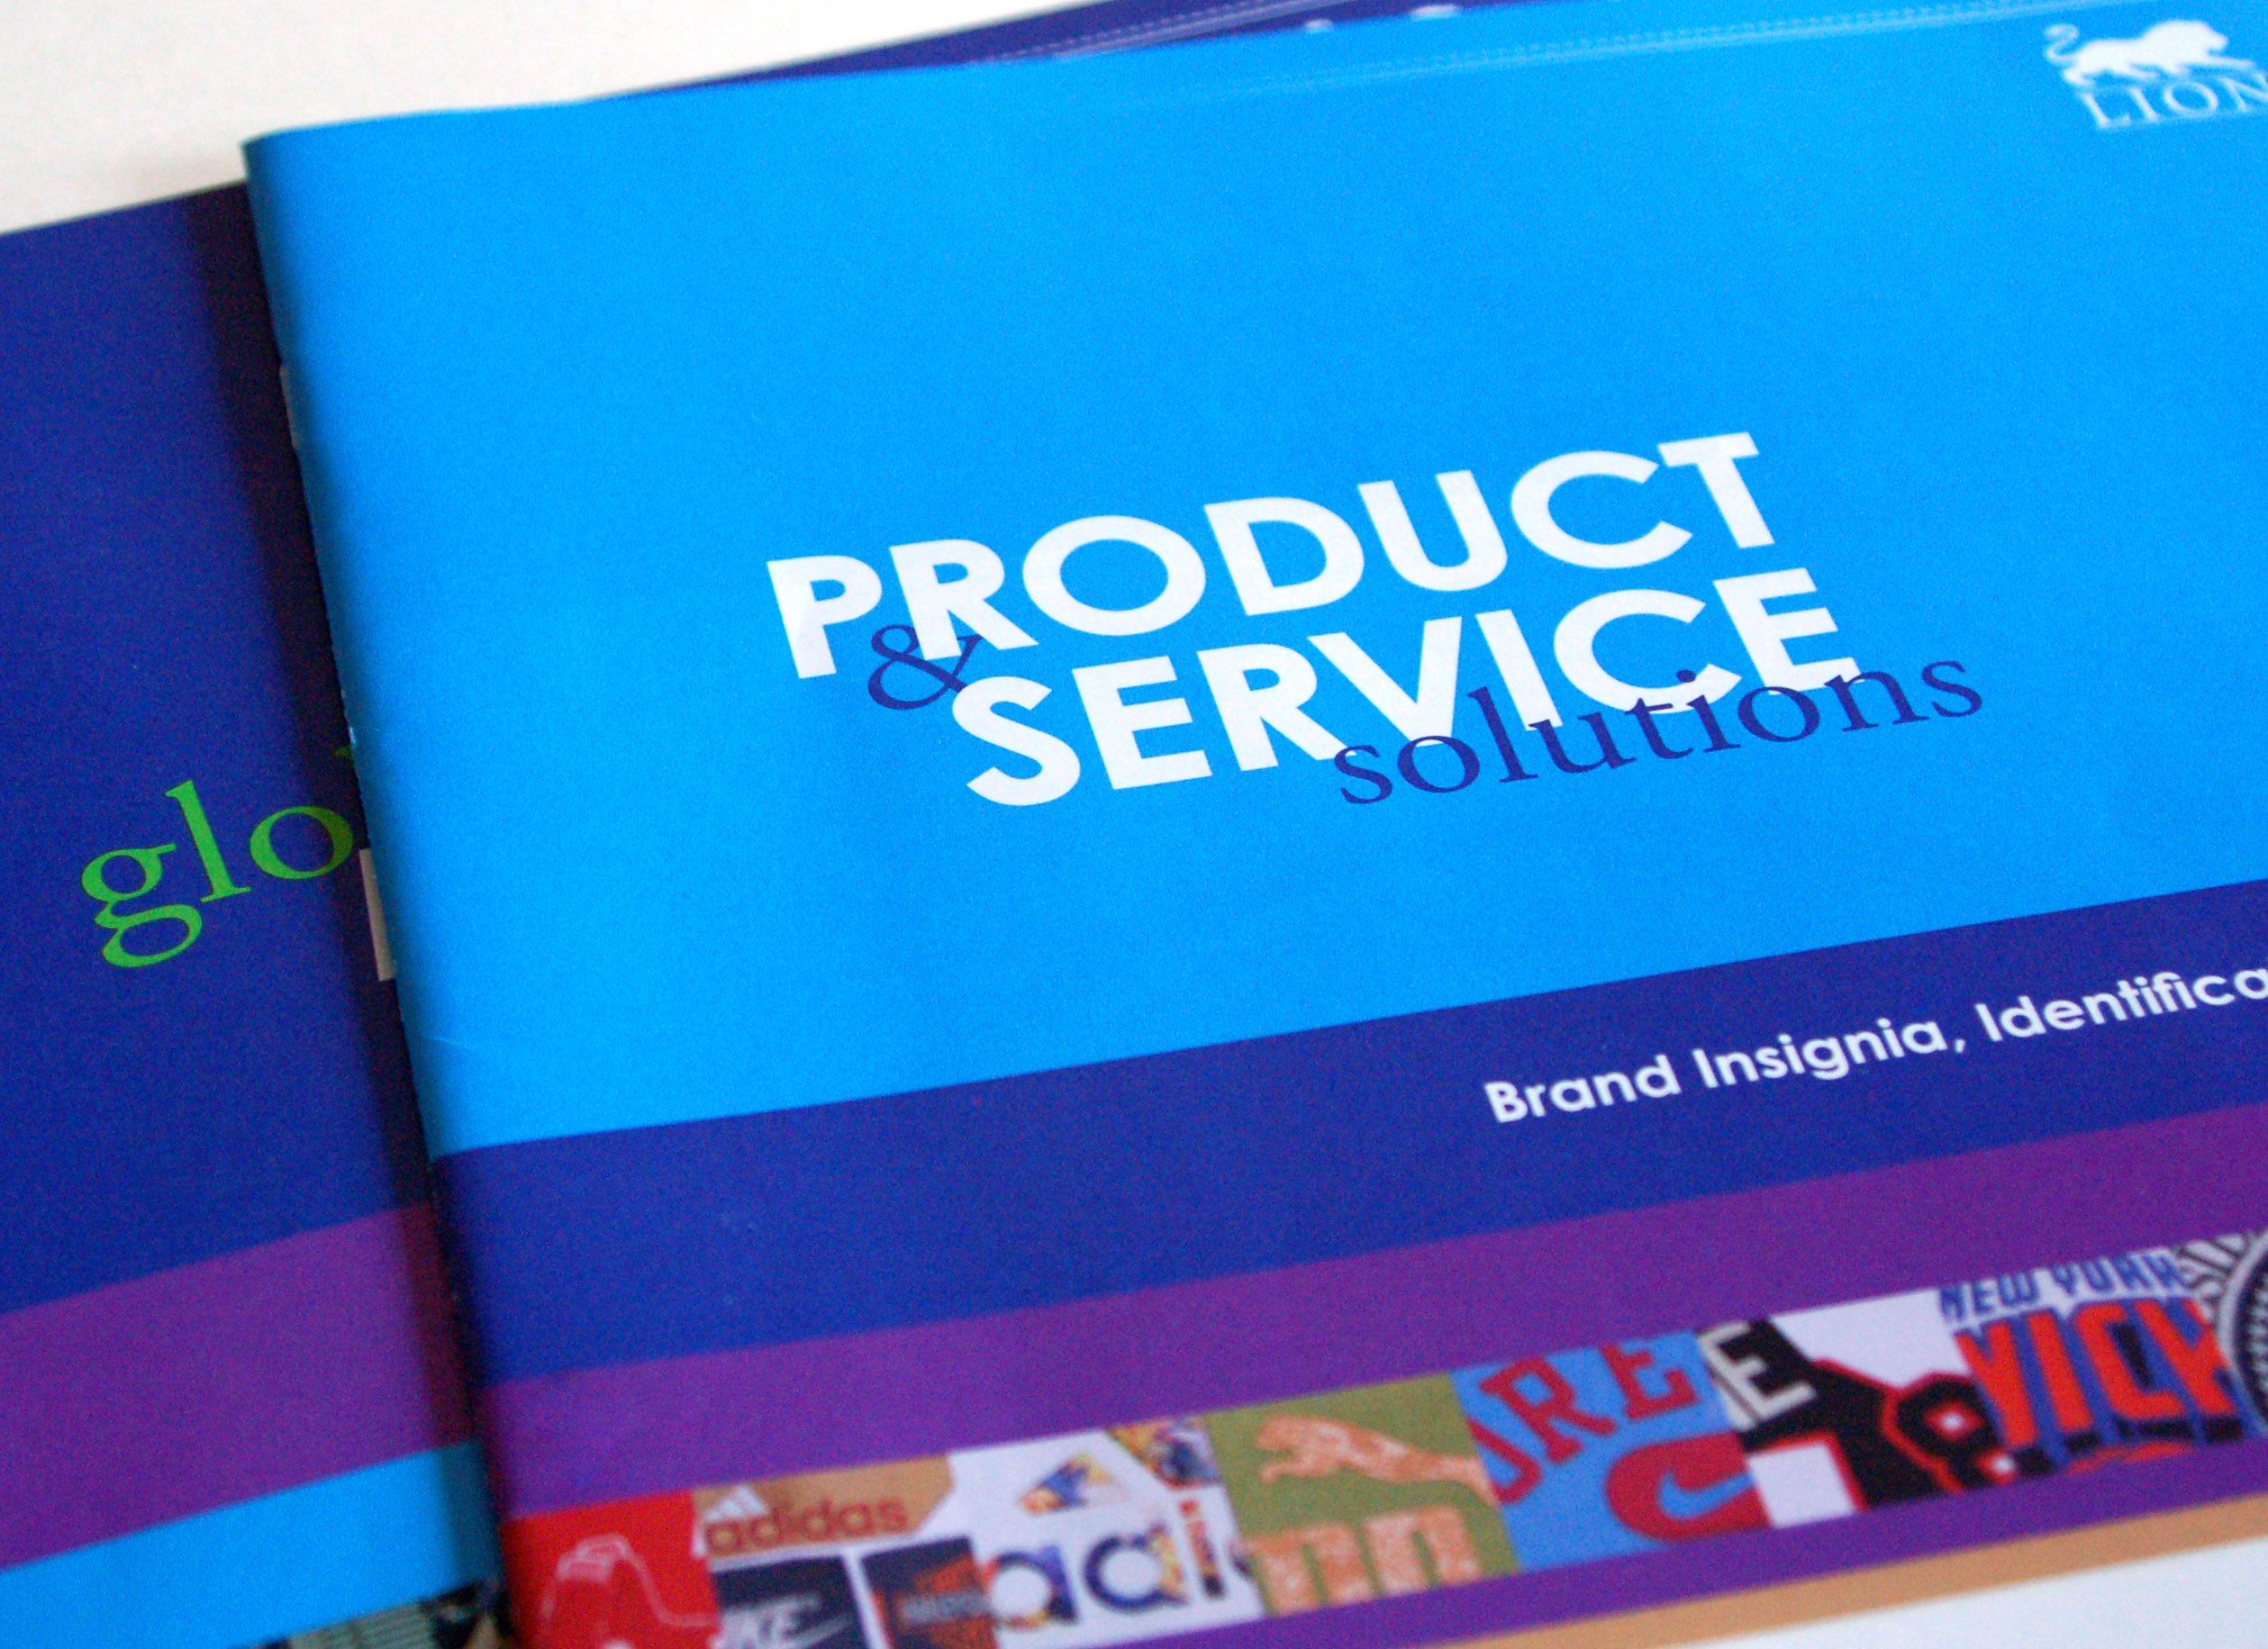 Lion Brothers Products & Services booklet cover photo